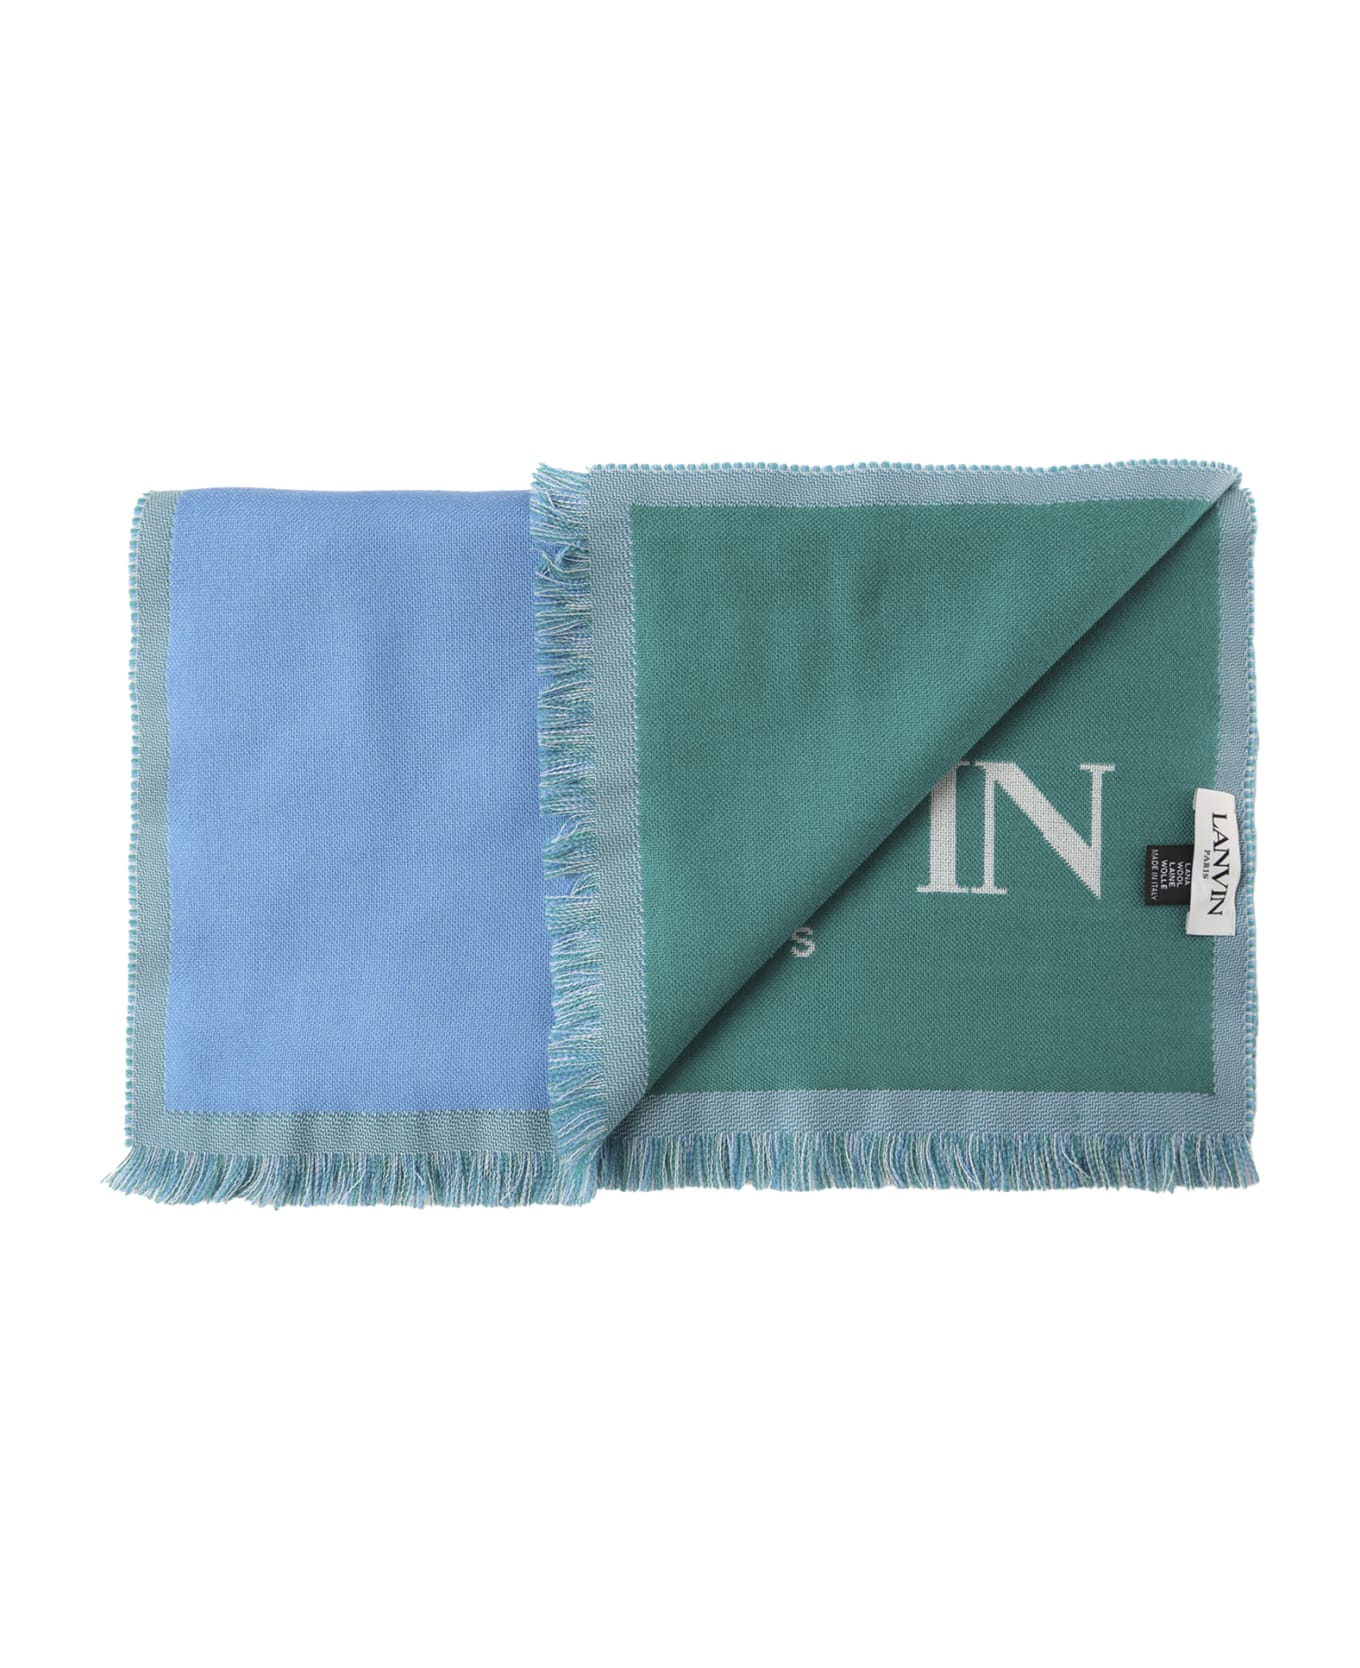 Lanvin Scarf With Lettering Logo - Blue/green